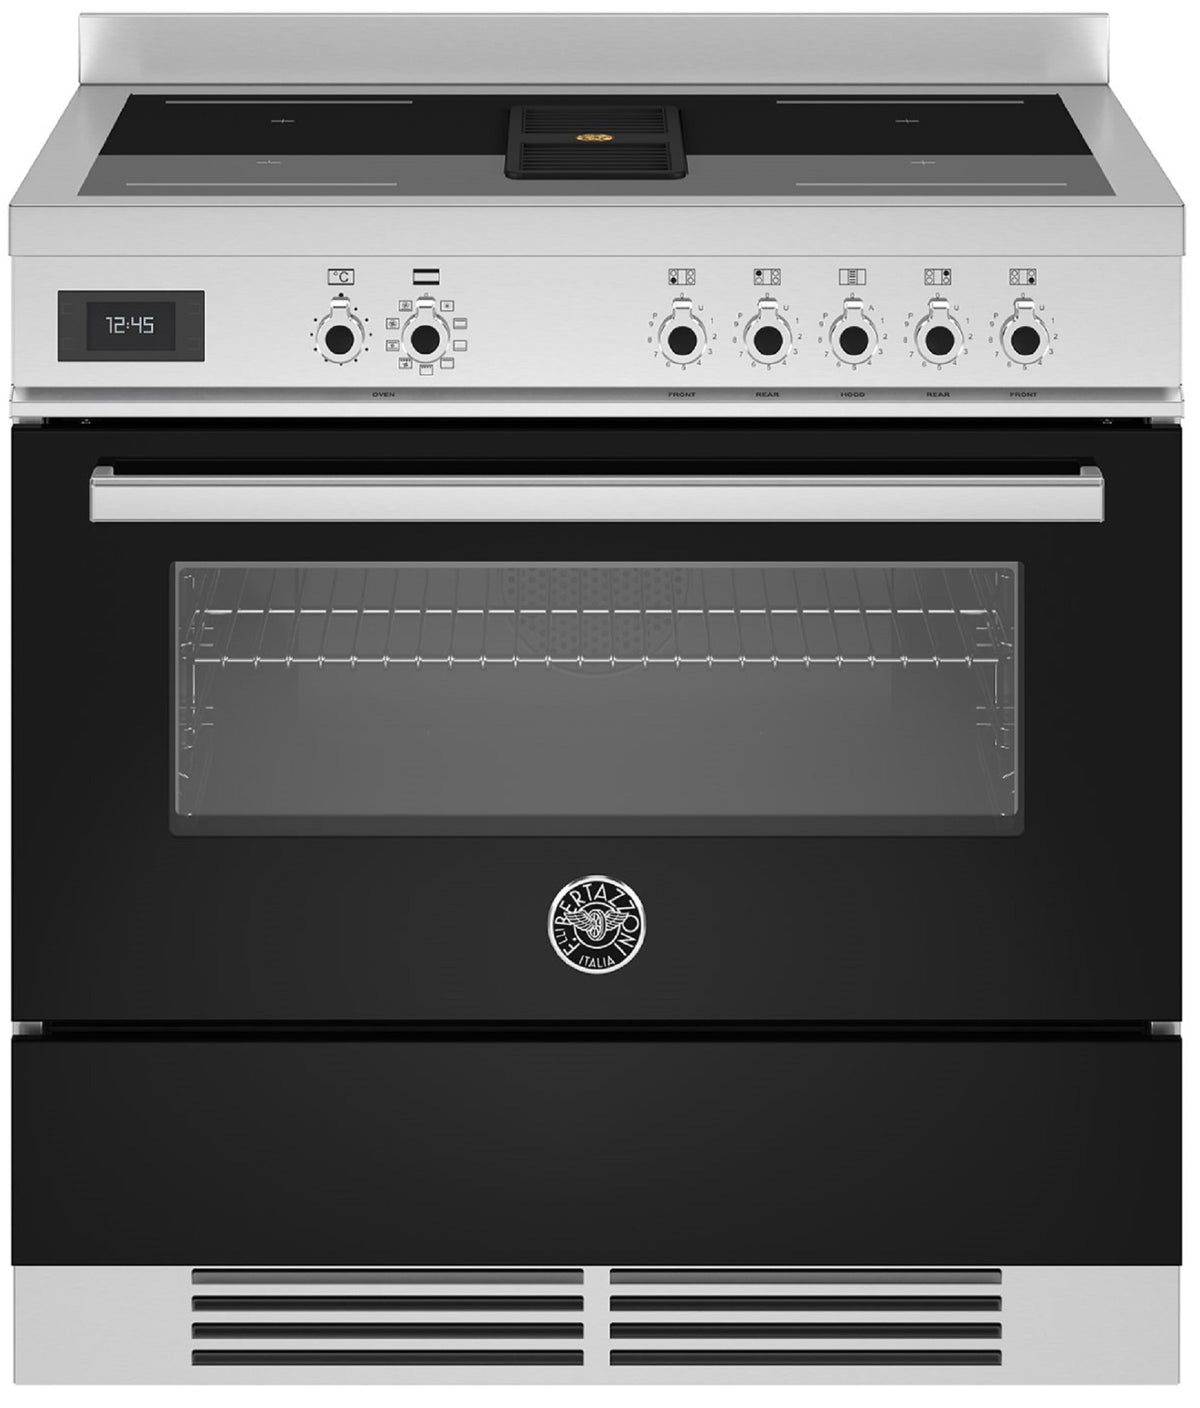 BERTAZZONI PROCH94I1ENET 90cm Electric Oven 5 Zone Induction Hob with in-built Extractor Range Cooker in Black